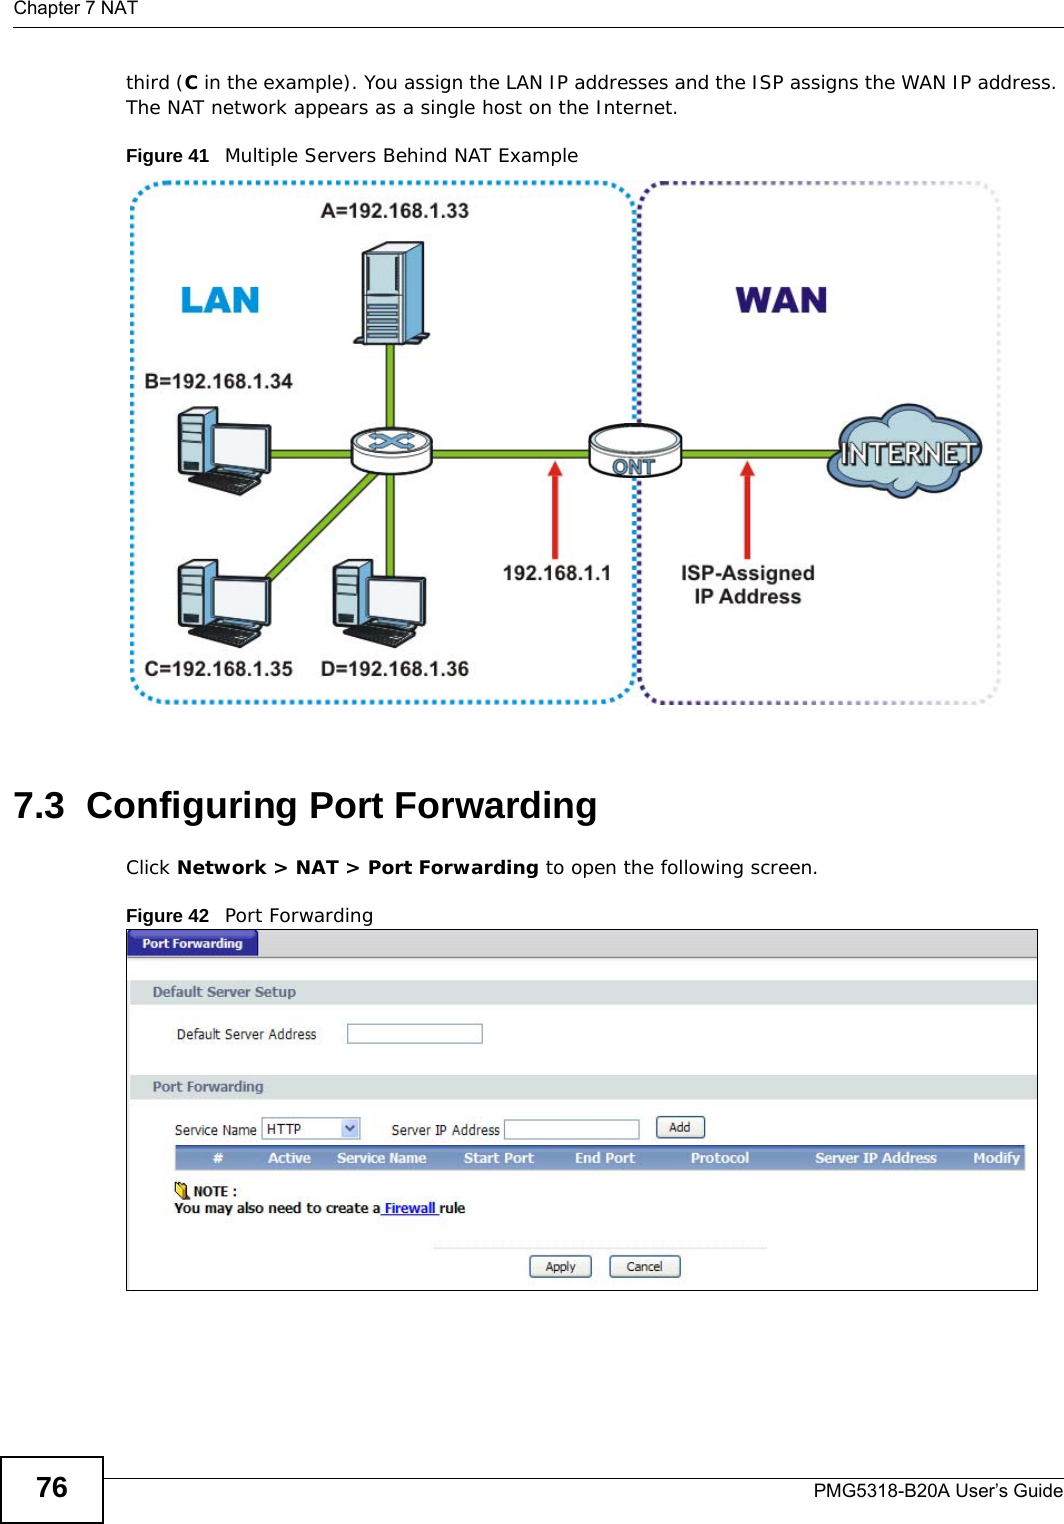 Chapter 7 NATPMG5318-B20A User’s Guide76third (C in the example). You assign the LAN IP addresses and the ISP assigns the WAN IP address. The NAT network appears as a single host on the Internet.Figure 41   Multiple Servers Behind NAT Example7.3  Configuring Port Forwarding Click Network &gt; NAT &gt; Port Forwarding to open the following screen.Figure 42   Port Forwarding